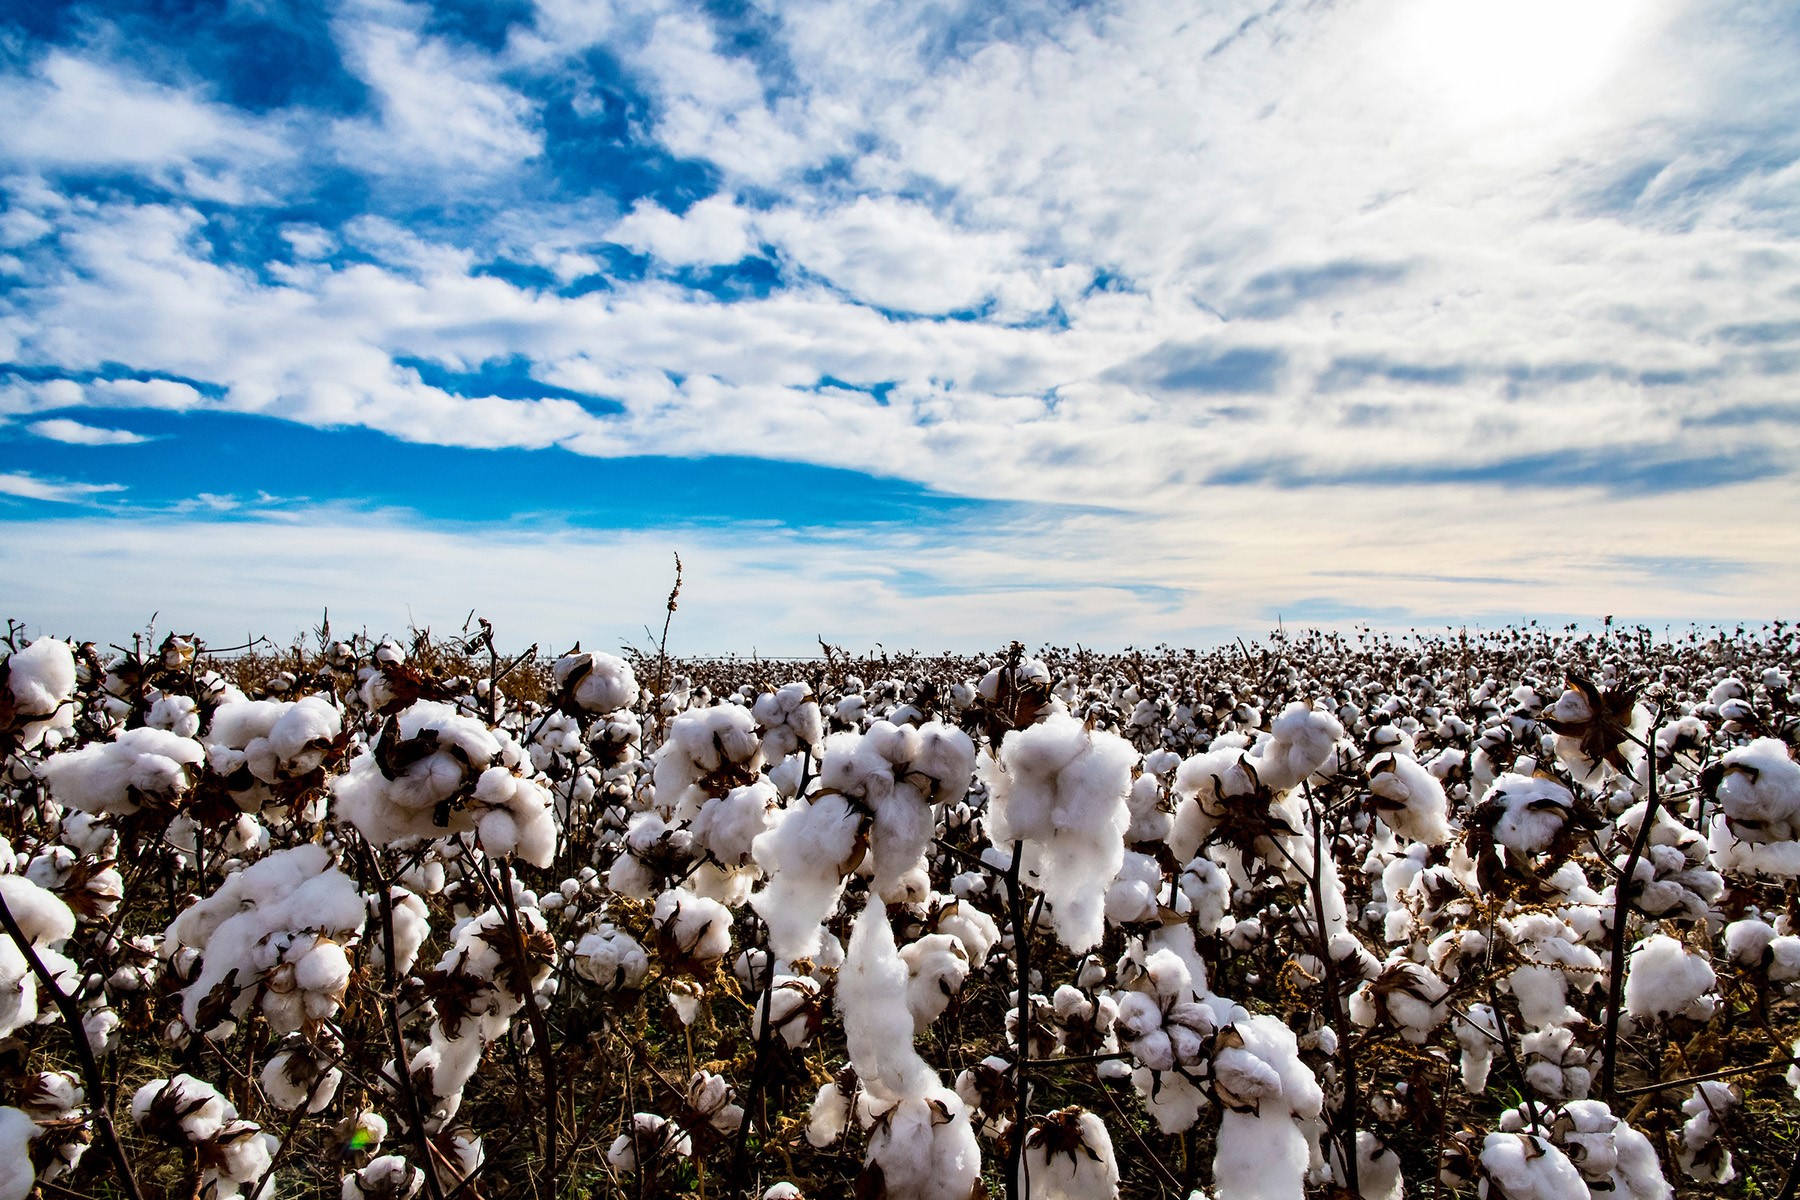 Gap Inc. joins U.S. Cotton Trust Protocol to use only 100% Sustainably-Sourced Cotton by 2025